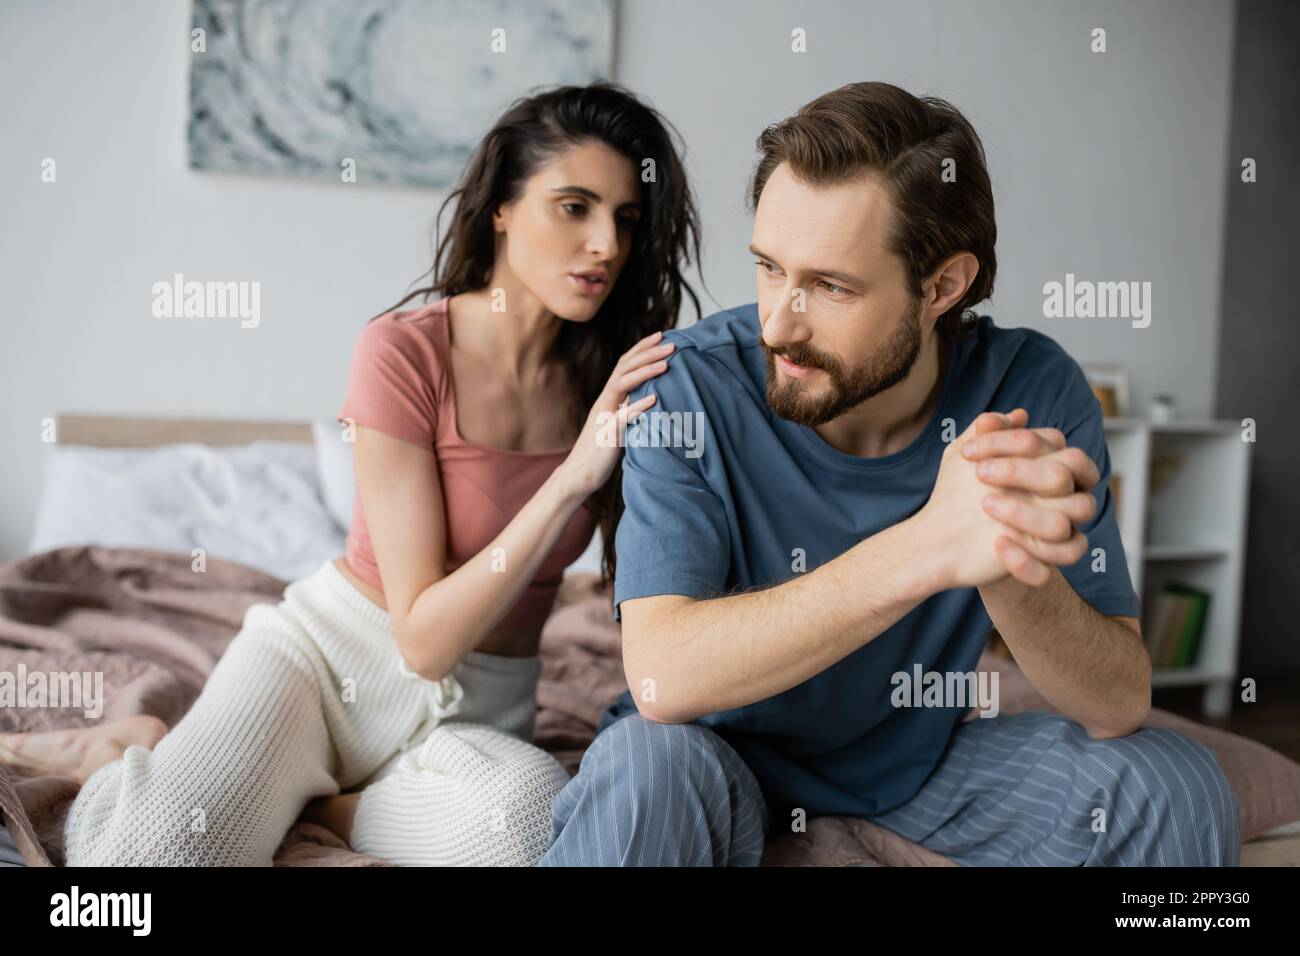 Brunette woman calming down boyfriend with clenched hands in bedroom,stock image Stock Photo